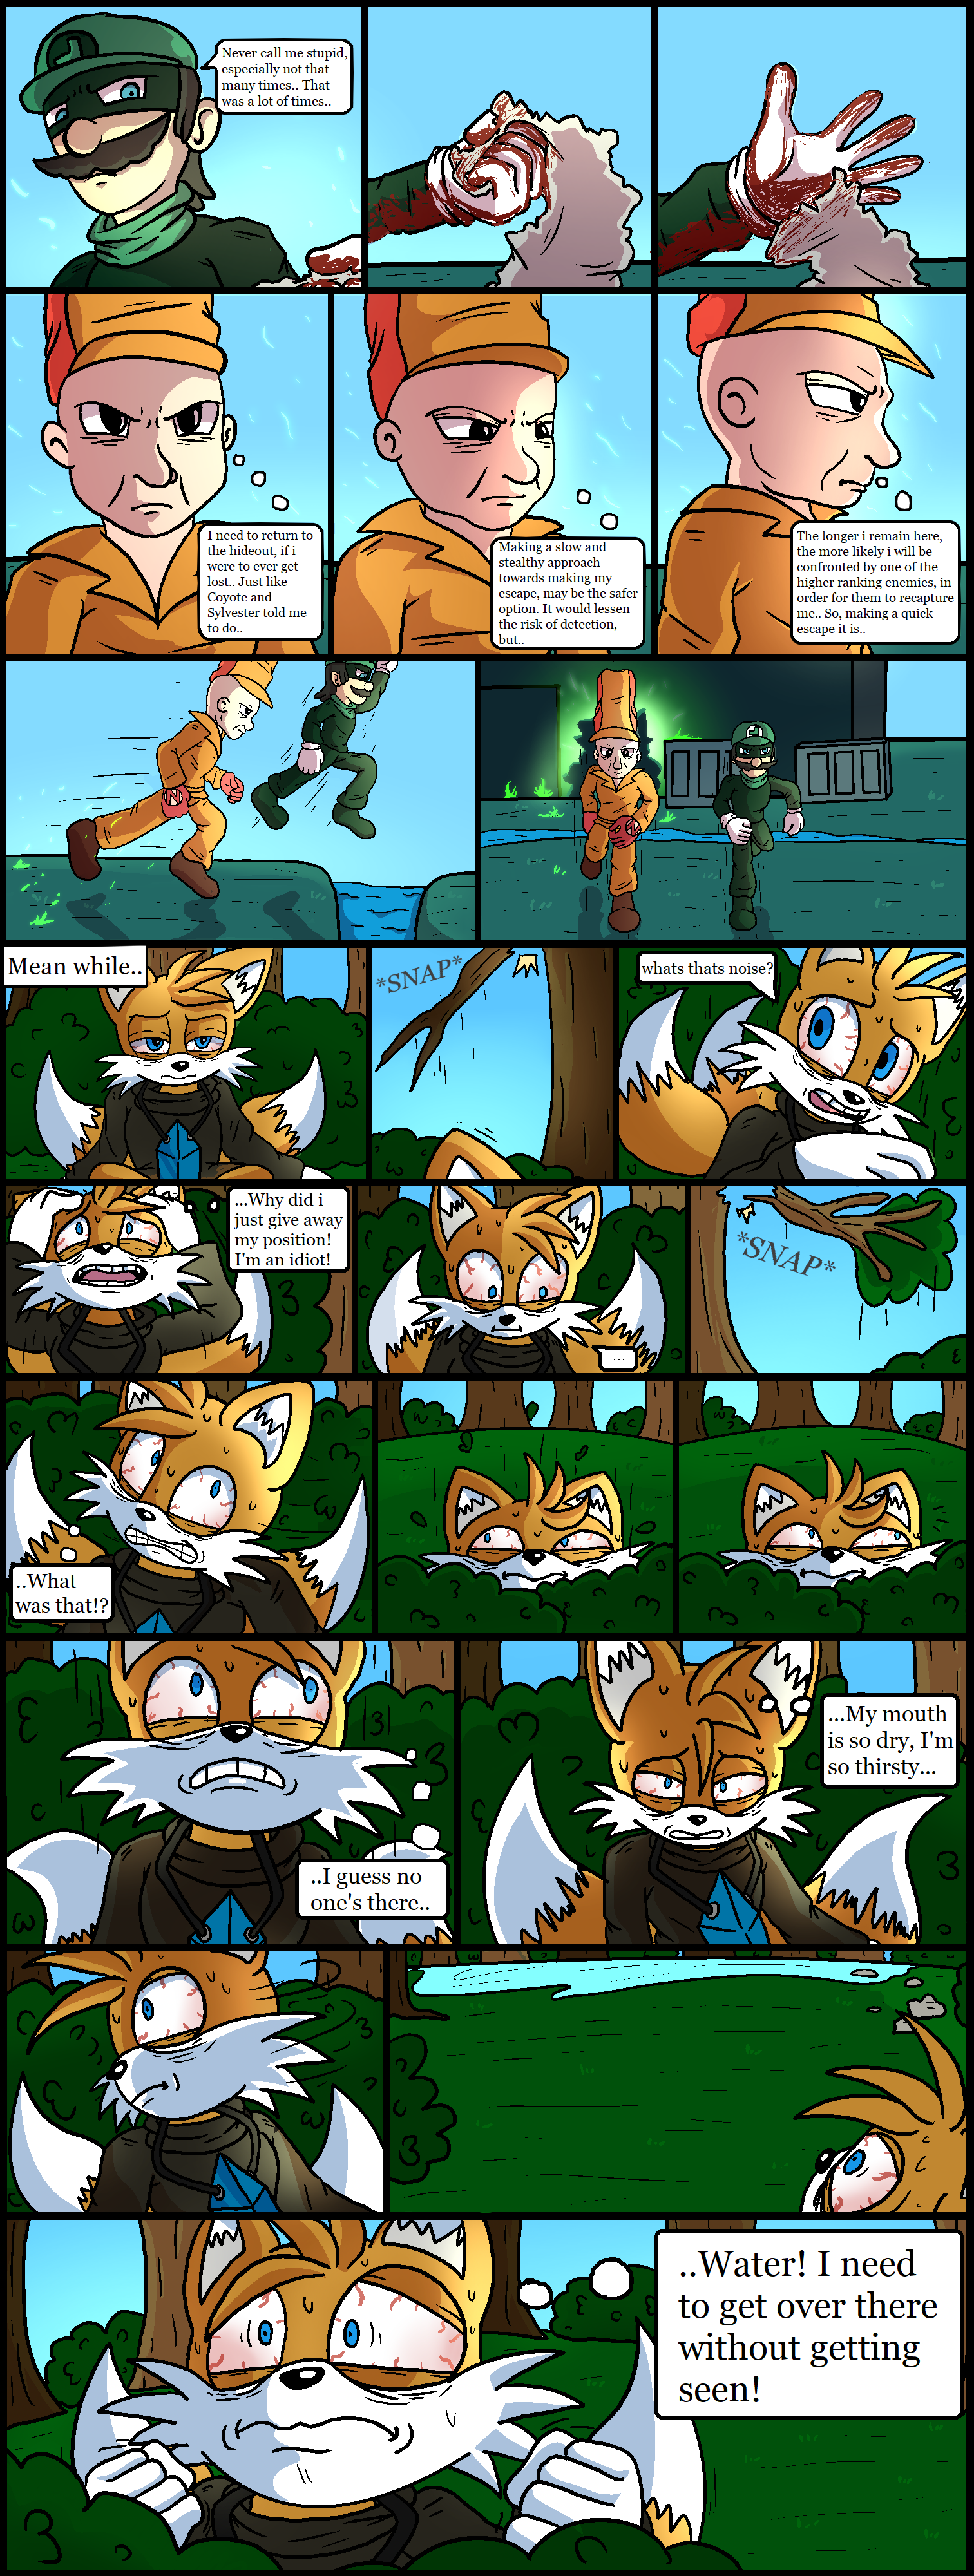 ch24/pg12.png. If you're seeing this, enable images. Or, perhaps we have a website issue. Try refreshing, if unsuccessful email commodorian@tailsgetstrolled.org with a detailed description of how you got here.